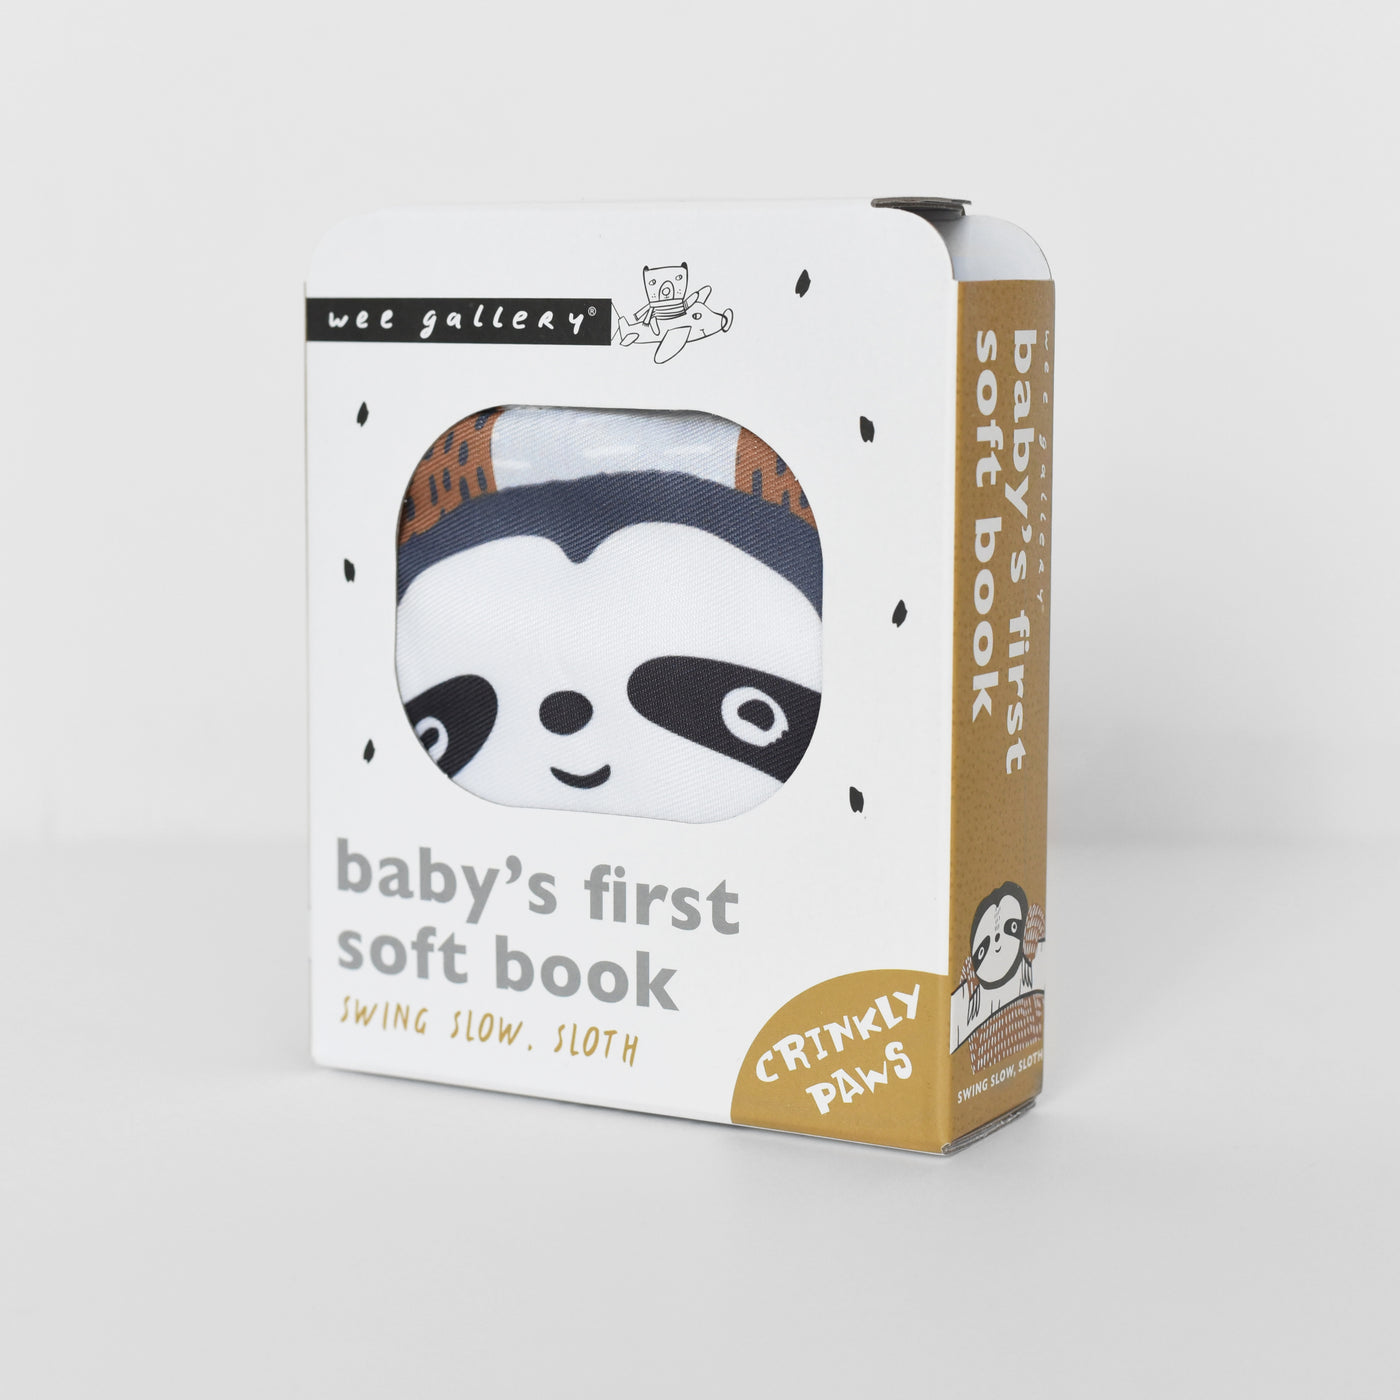 WEE GALLERY - Sloth Soft Cloth Book